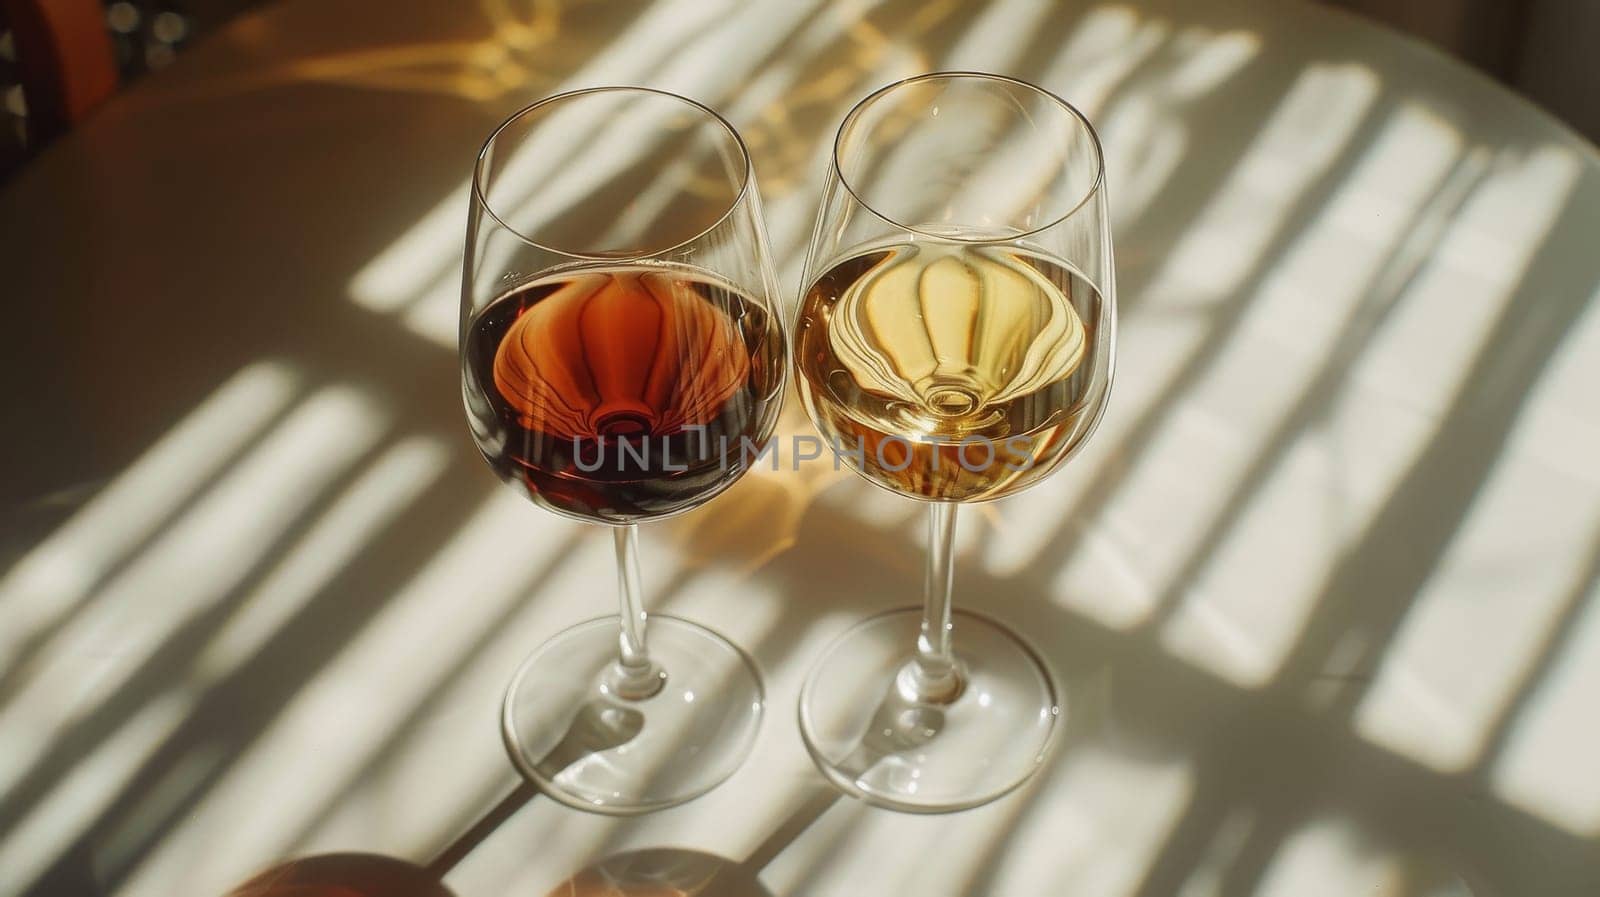 Two wine glasses, one red and one white, sit on a table.